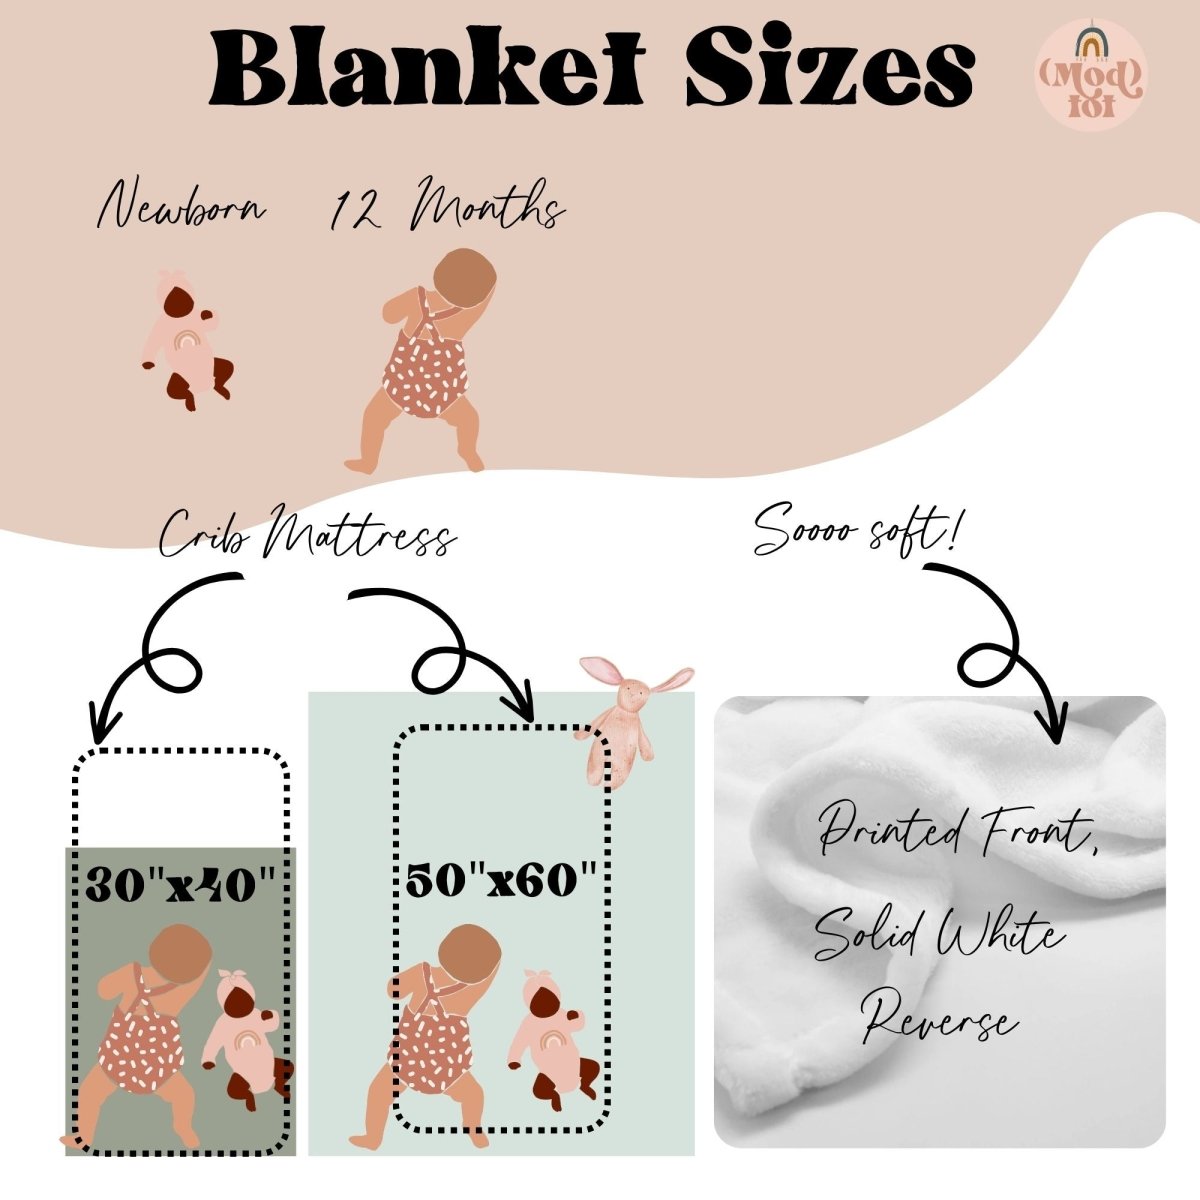 Wild Woods Personalized Minky Blanket - gender_boy, Personalized_Yes, text